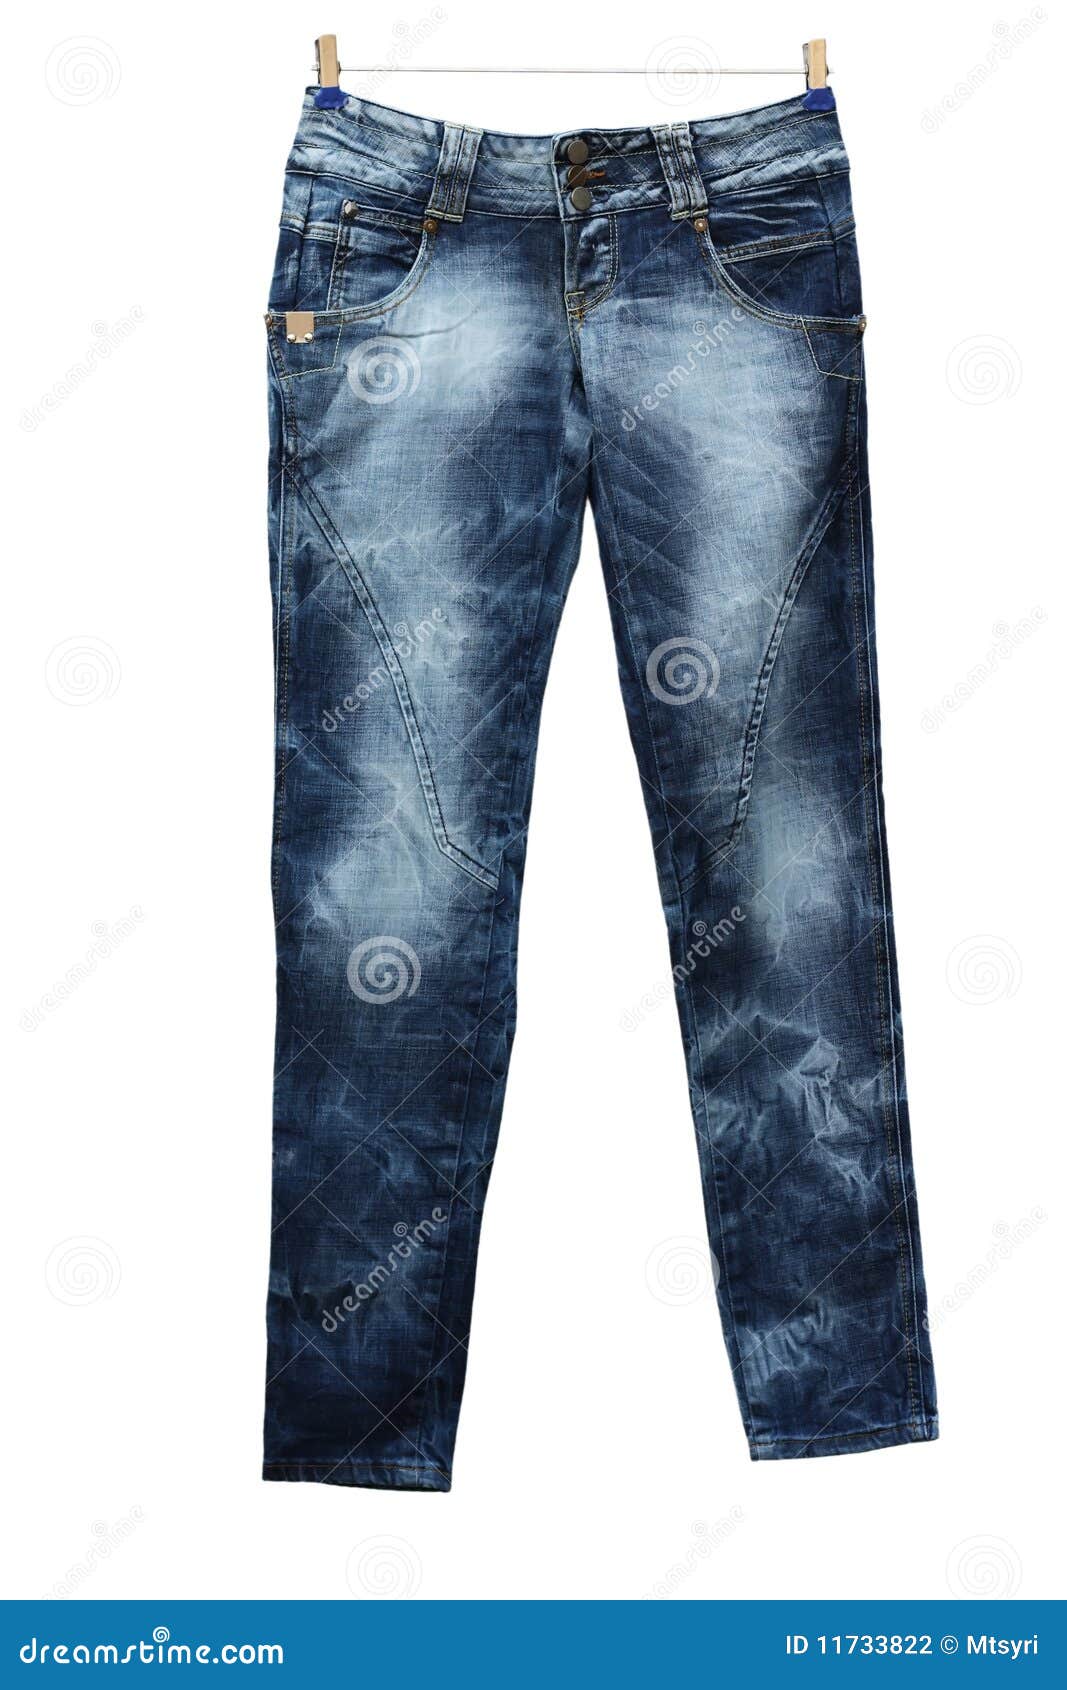 Pair of blue jeans stock photo. Image of modern, sewing - 11733822